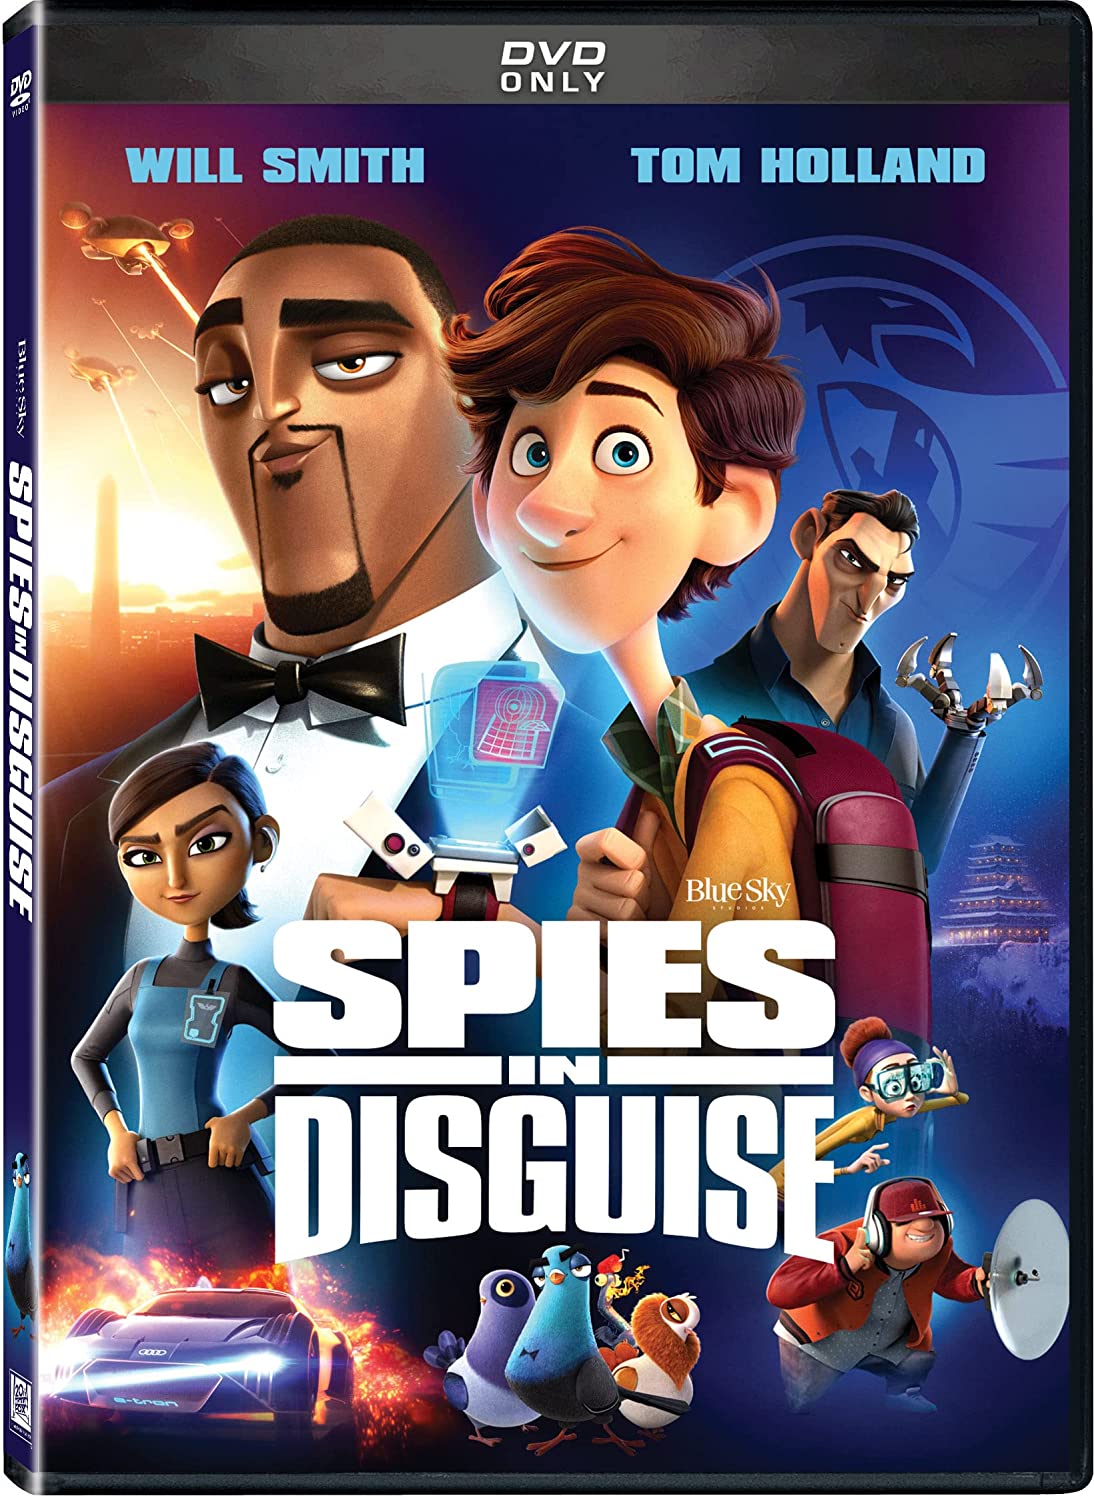 DVD Movie Cover of Spies in Disguise showing cartoon characters